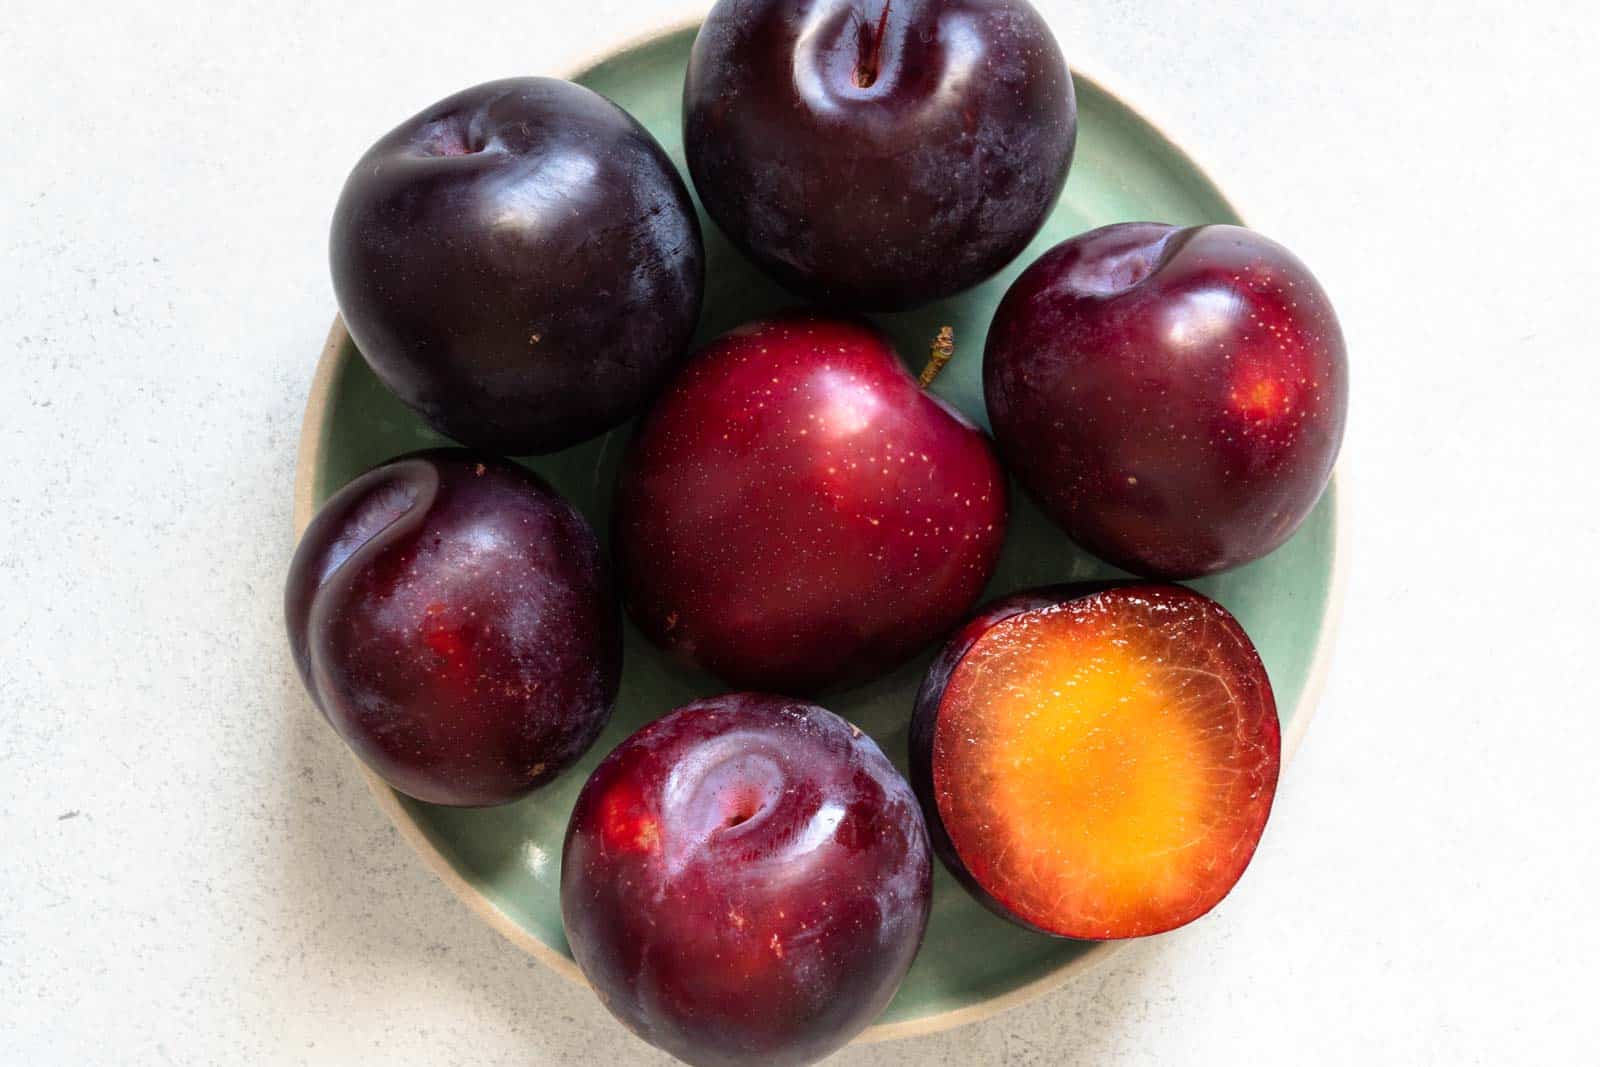 Plums on a plate for July produce guide